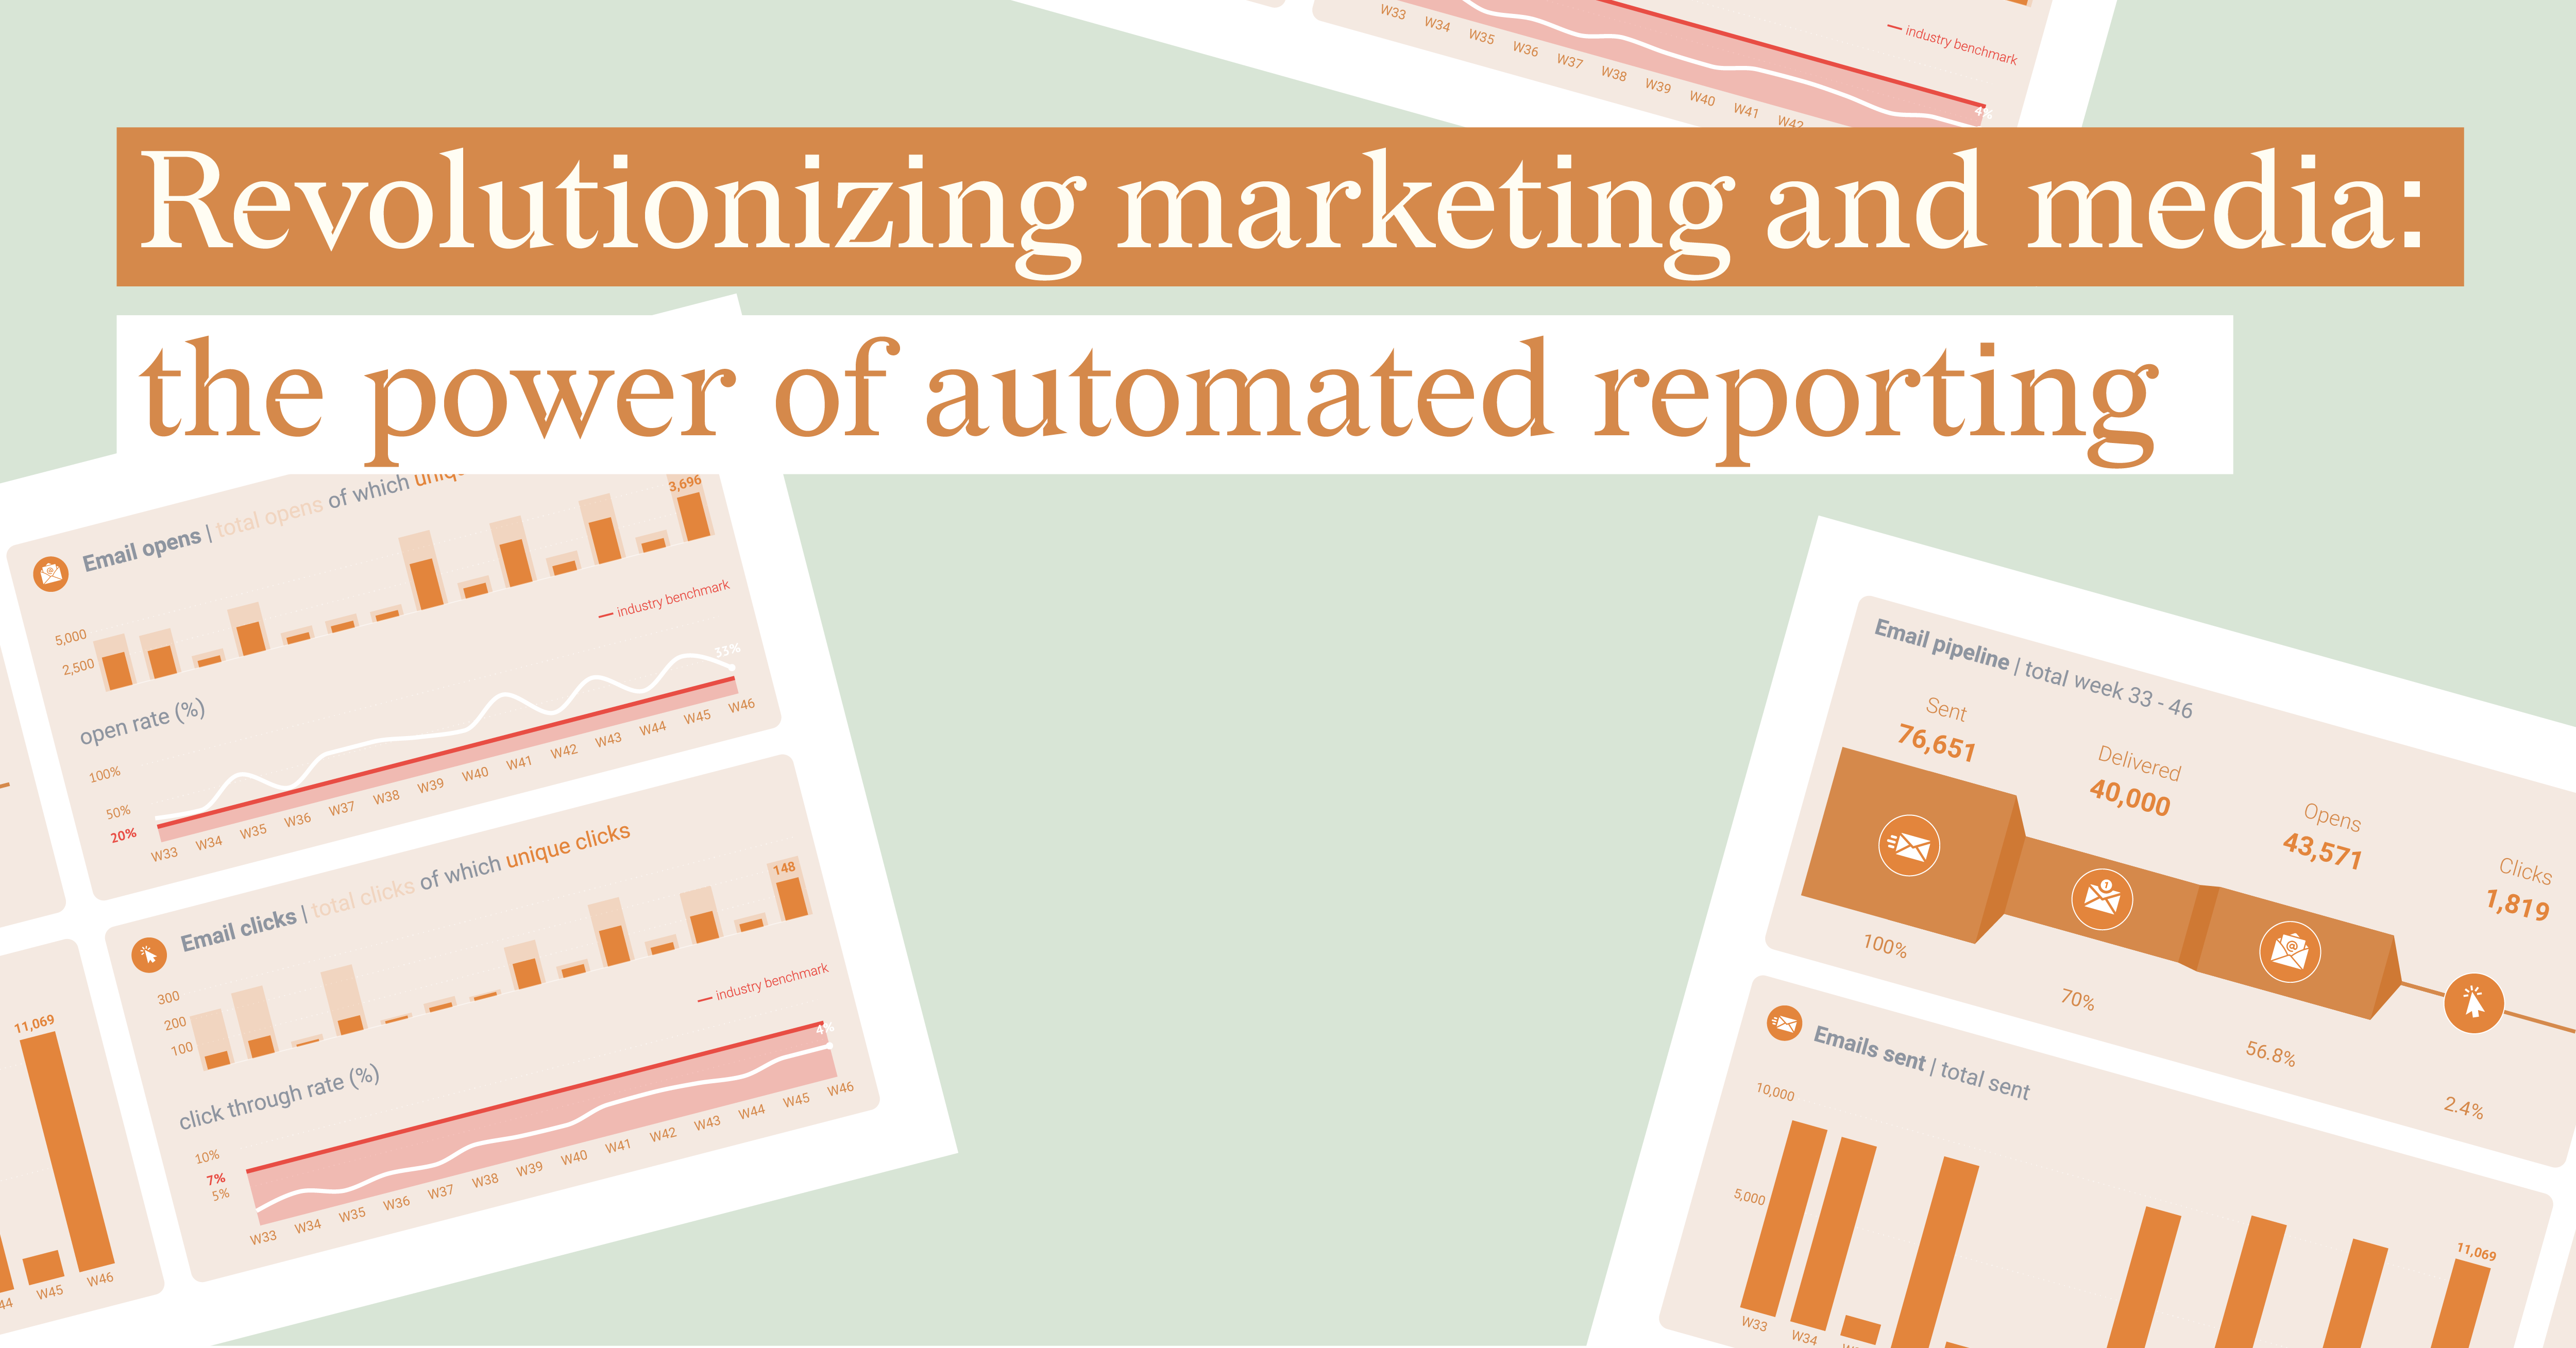 datylon-blog-Revolutionizing-Marketing-and-Media-The-Power-of-Automated-Reporting-featured-image